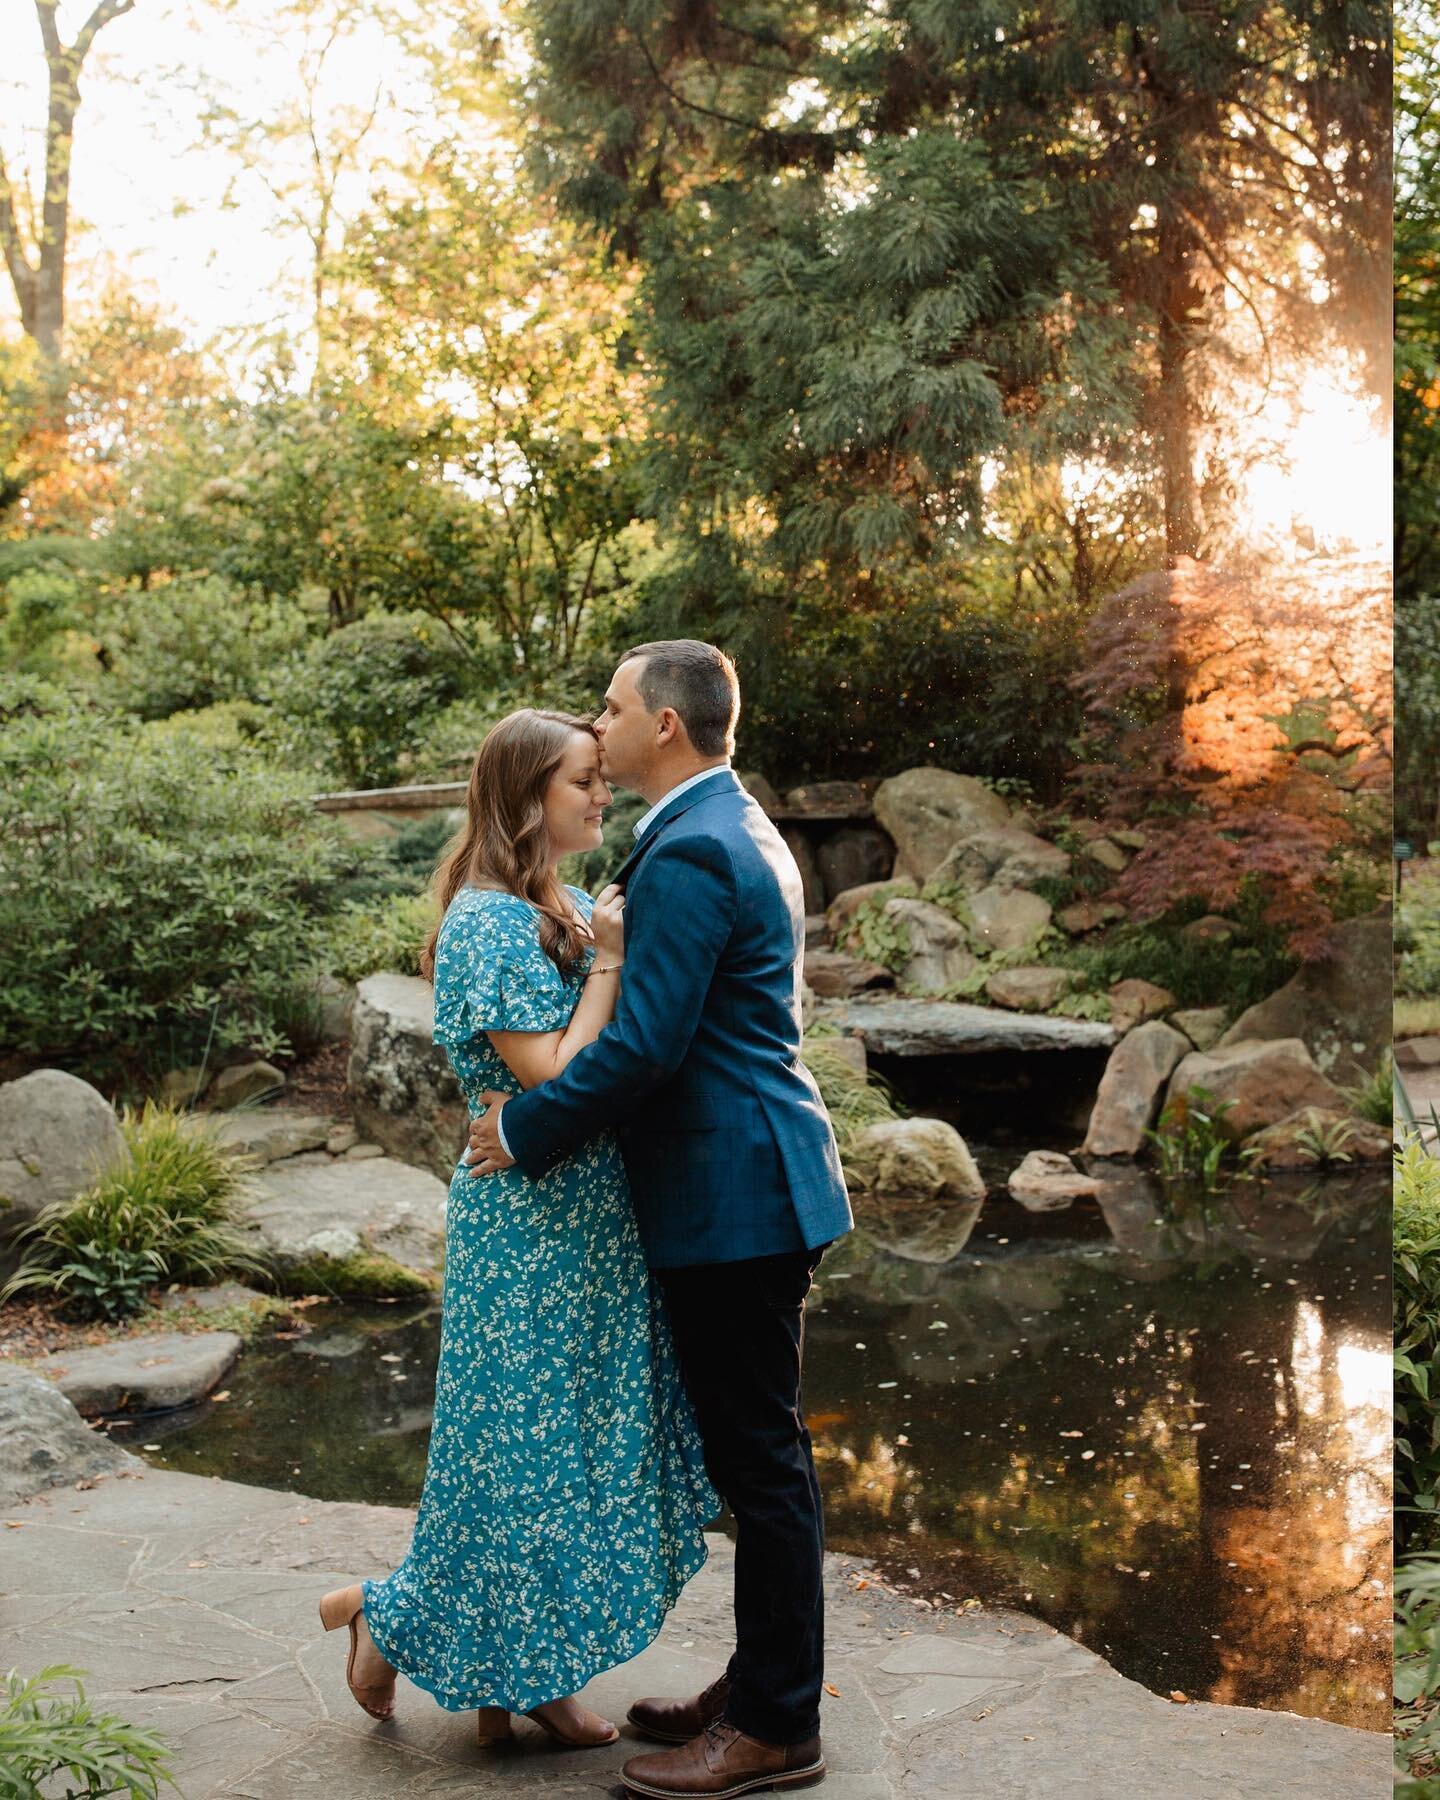 Golden hour sessions in spring gardens 😍 #charlotteengagementsession #charlotteengagementphotographer #unccbotanicalgardens #charlotteengagementphotography #unccharlotte #charlotteweddingphotographer